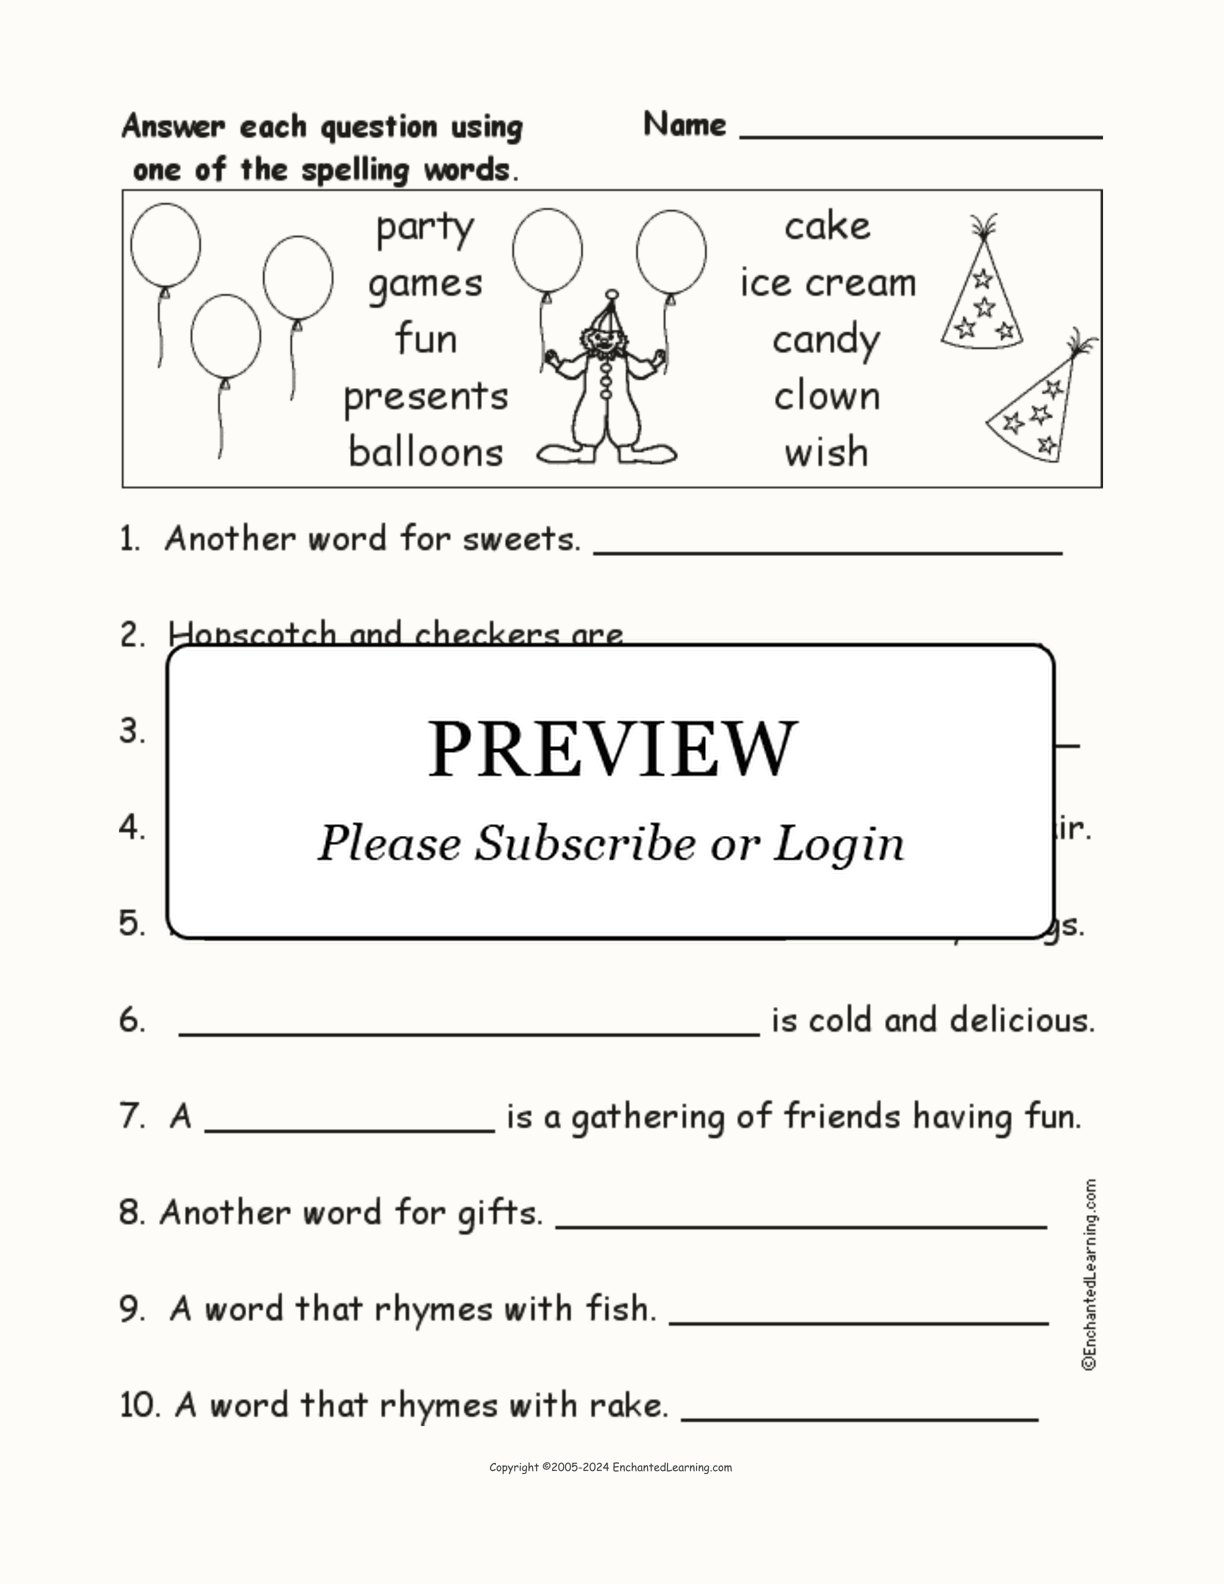 Birthday Spelling Word Questions interactive worksheet page 1